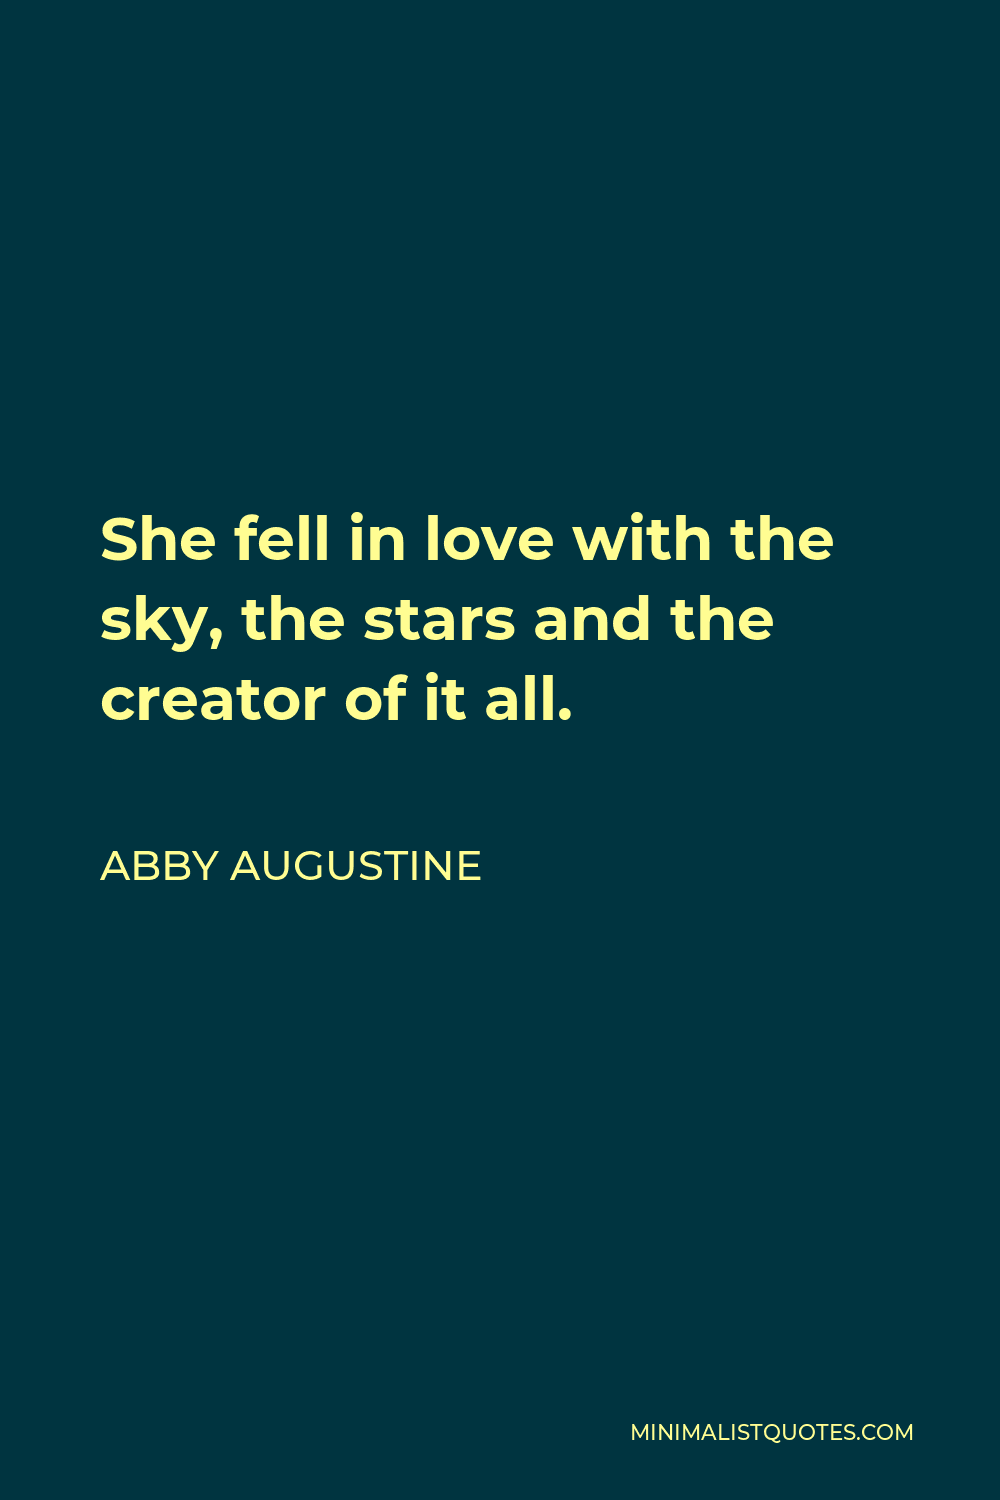 Abby Augustine Quote - She fell in love with the sky, the stars and the creator of it all.